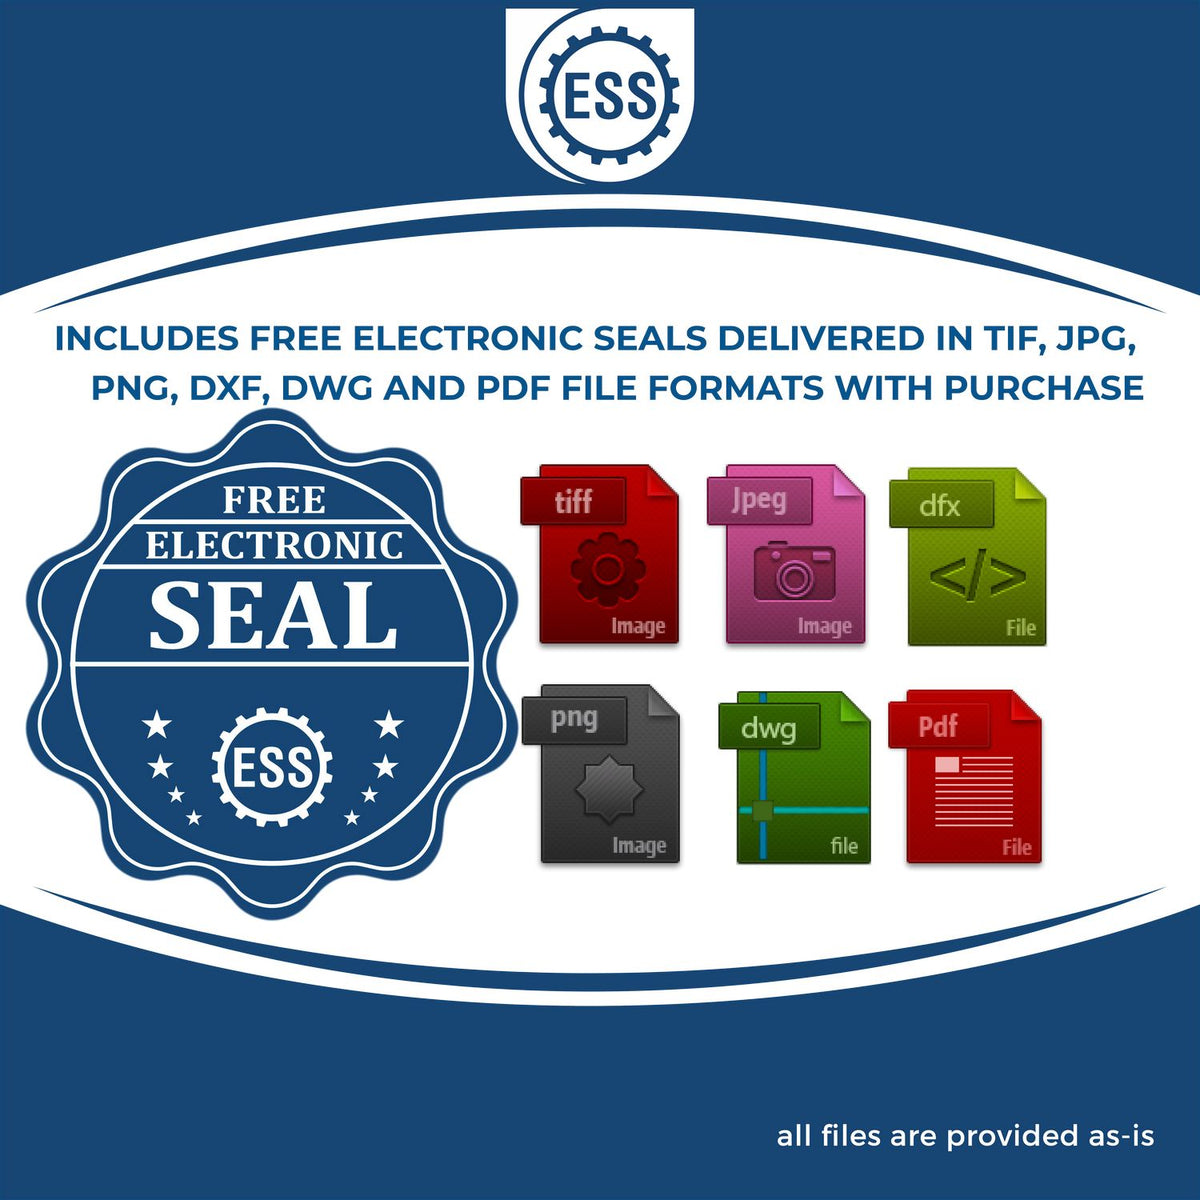 An infographic for the free electronic seal for the Self-Inking State Seal North Carolina Notary Stamp illustrating the different file type icons such as DXF, DWG, TIF, JPG and PNG.